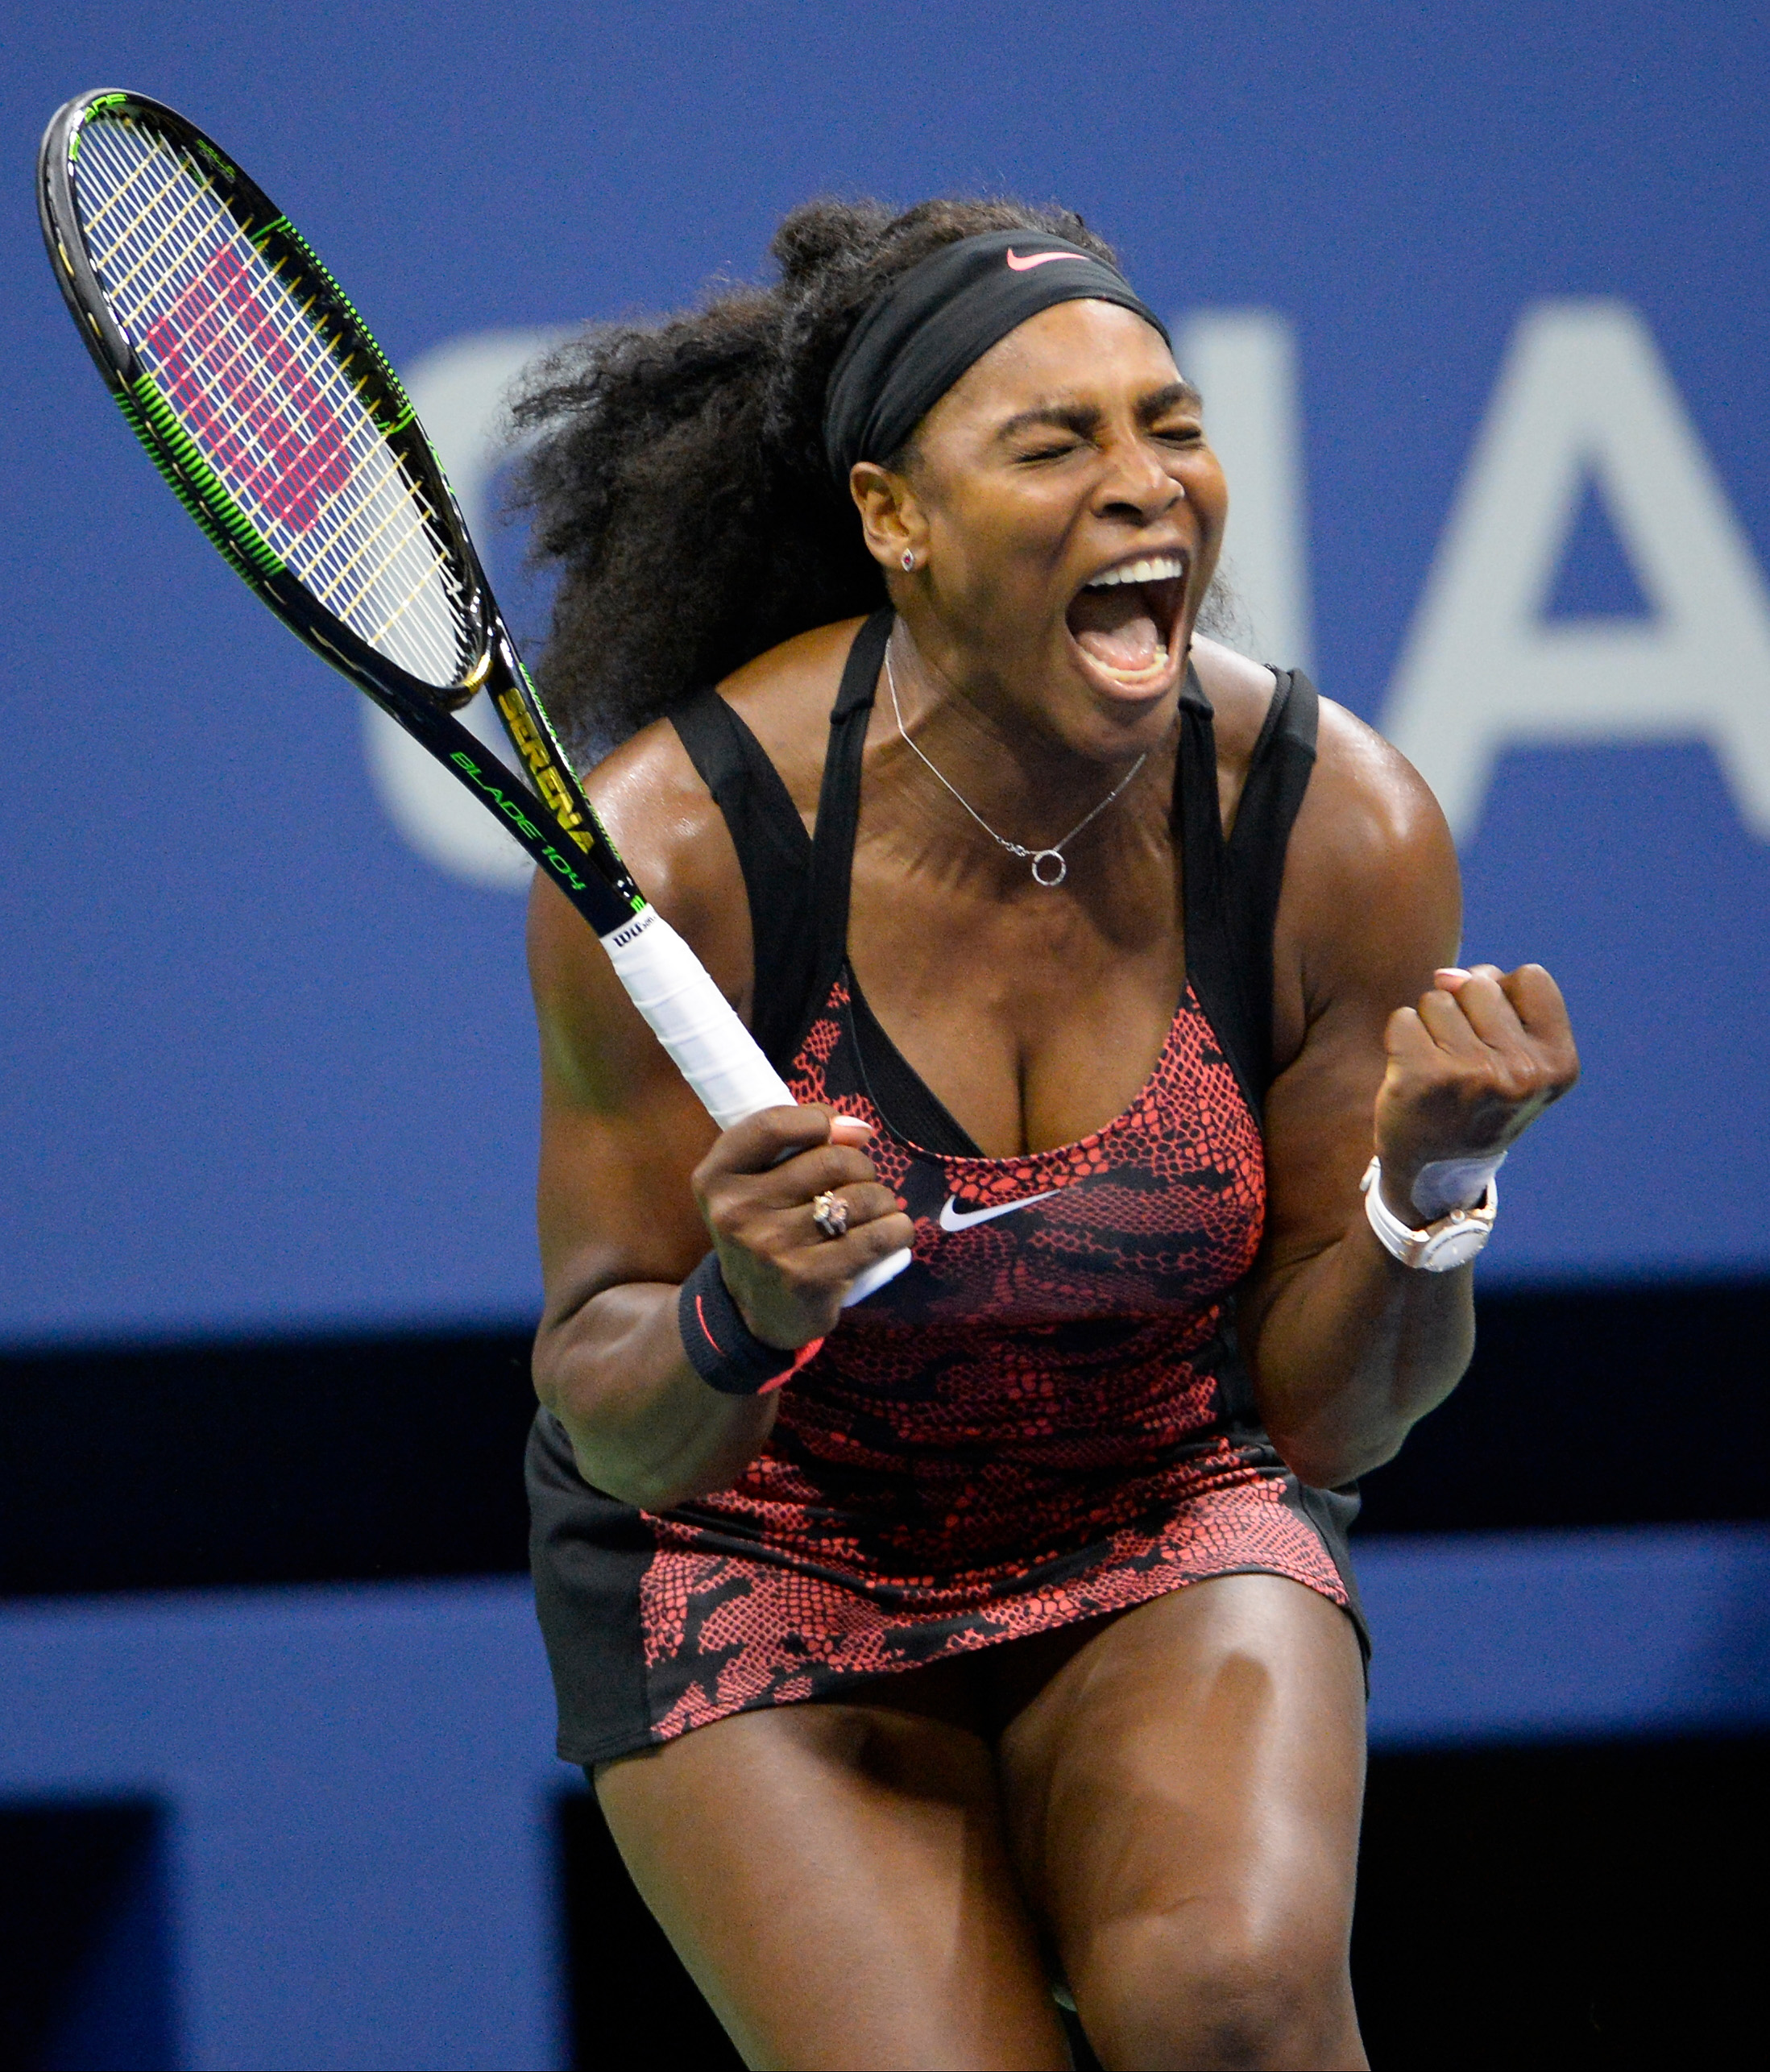 Sep 4, 2015; New York, NY, USA; Serena Williams of the USA reacts after breaking the serve of Bethanie Mattek-Sands of the USA (not pictured) in the second set on day five of the 2015 U.S. Open tennis tournament at USTA Billie Jean King National Tennis Center. Mandatory Credit: Robert Deutsch-USA TODAY Sports